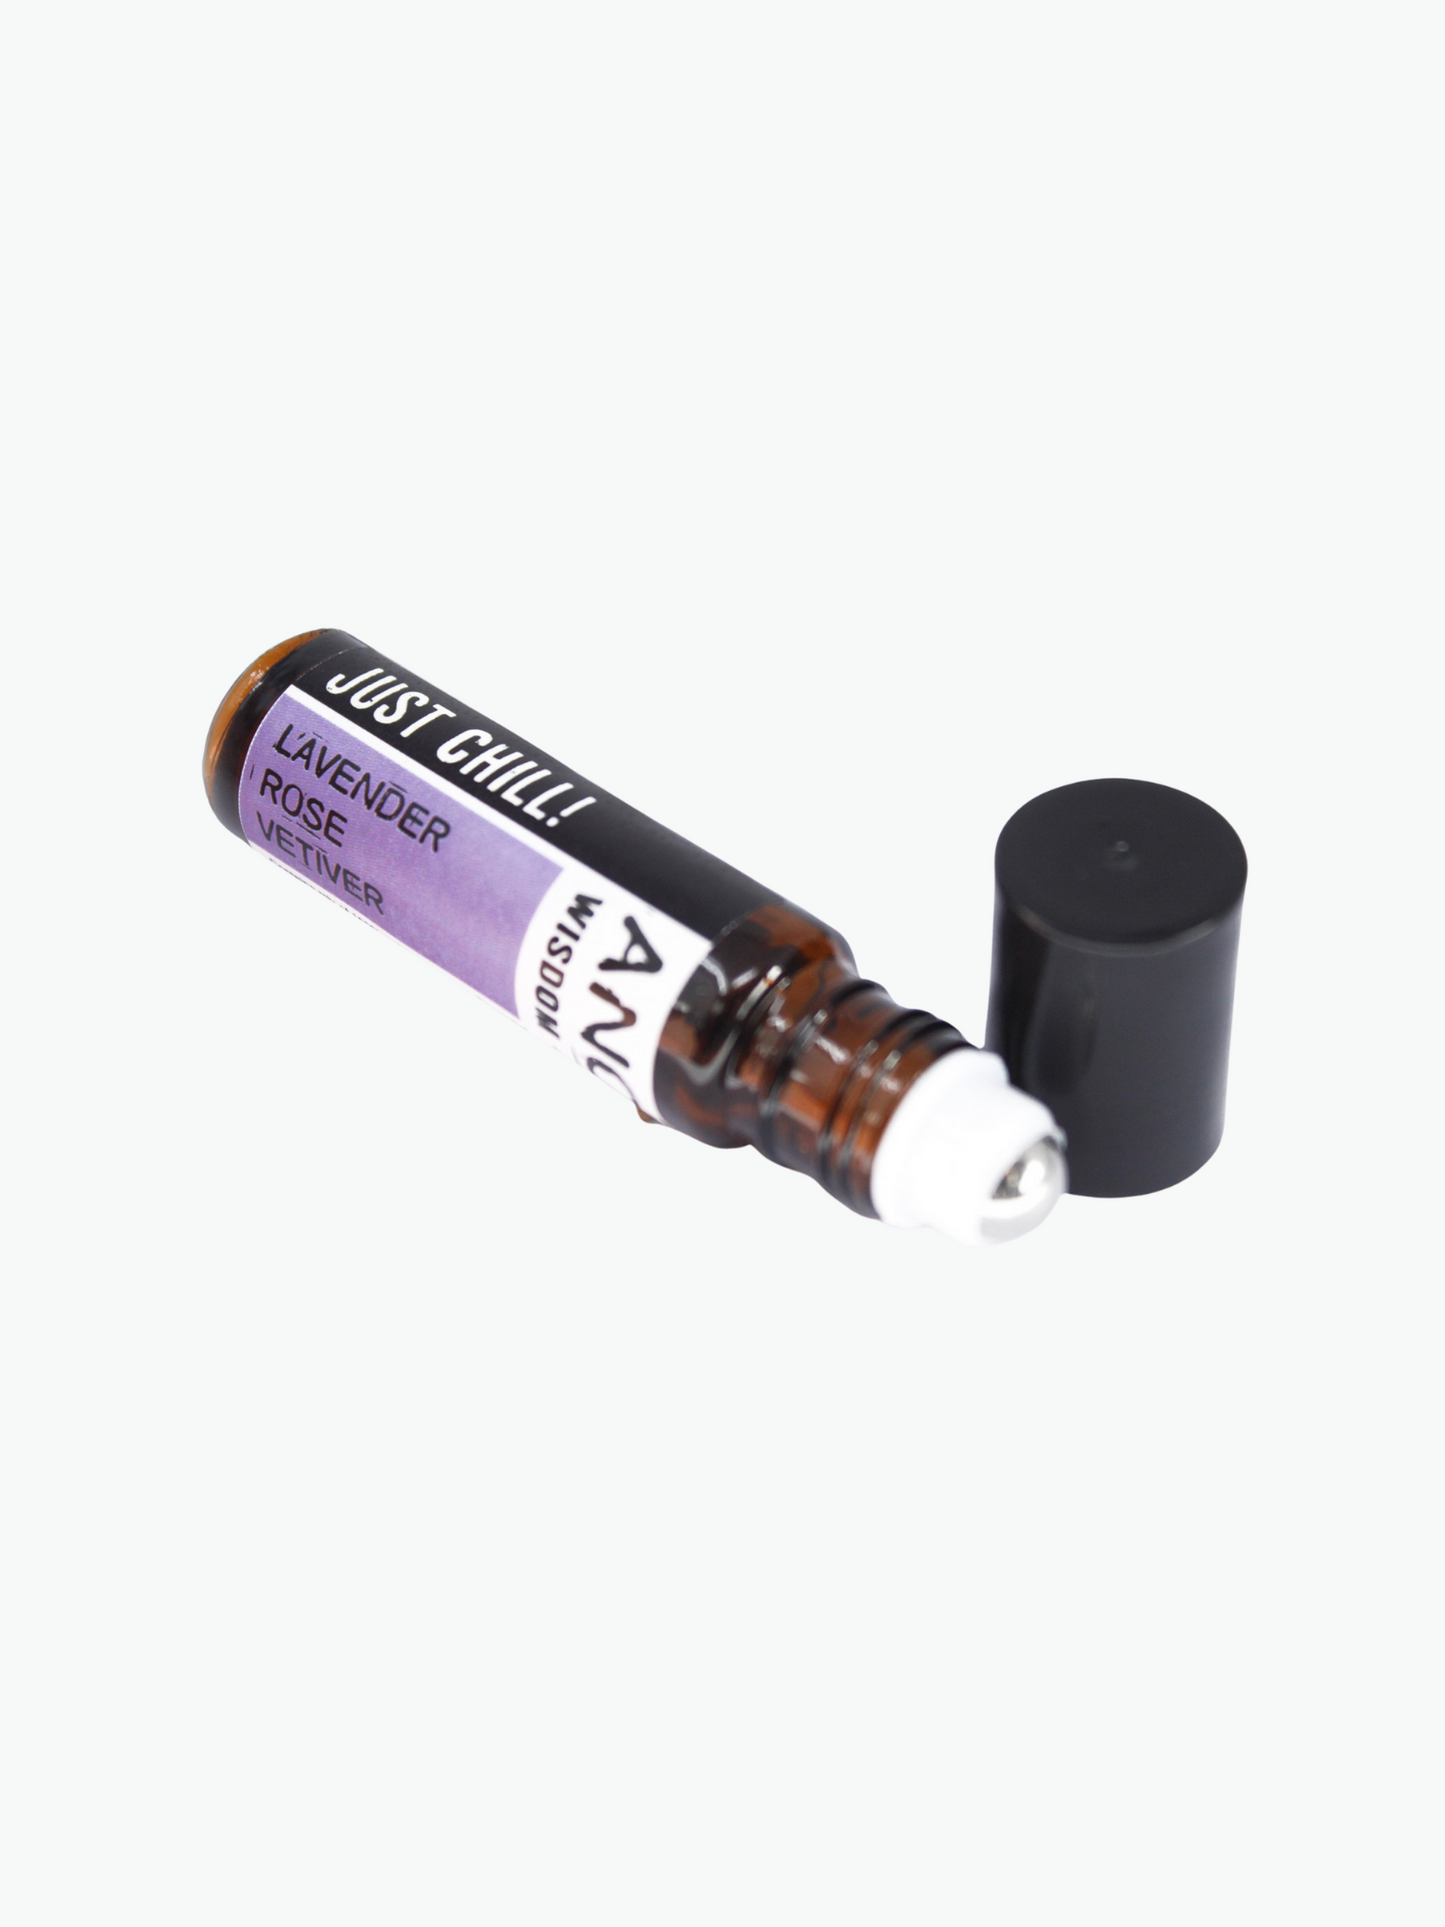 Just Chill! Roll-On Oil Blend